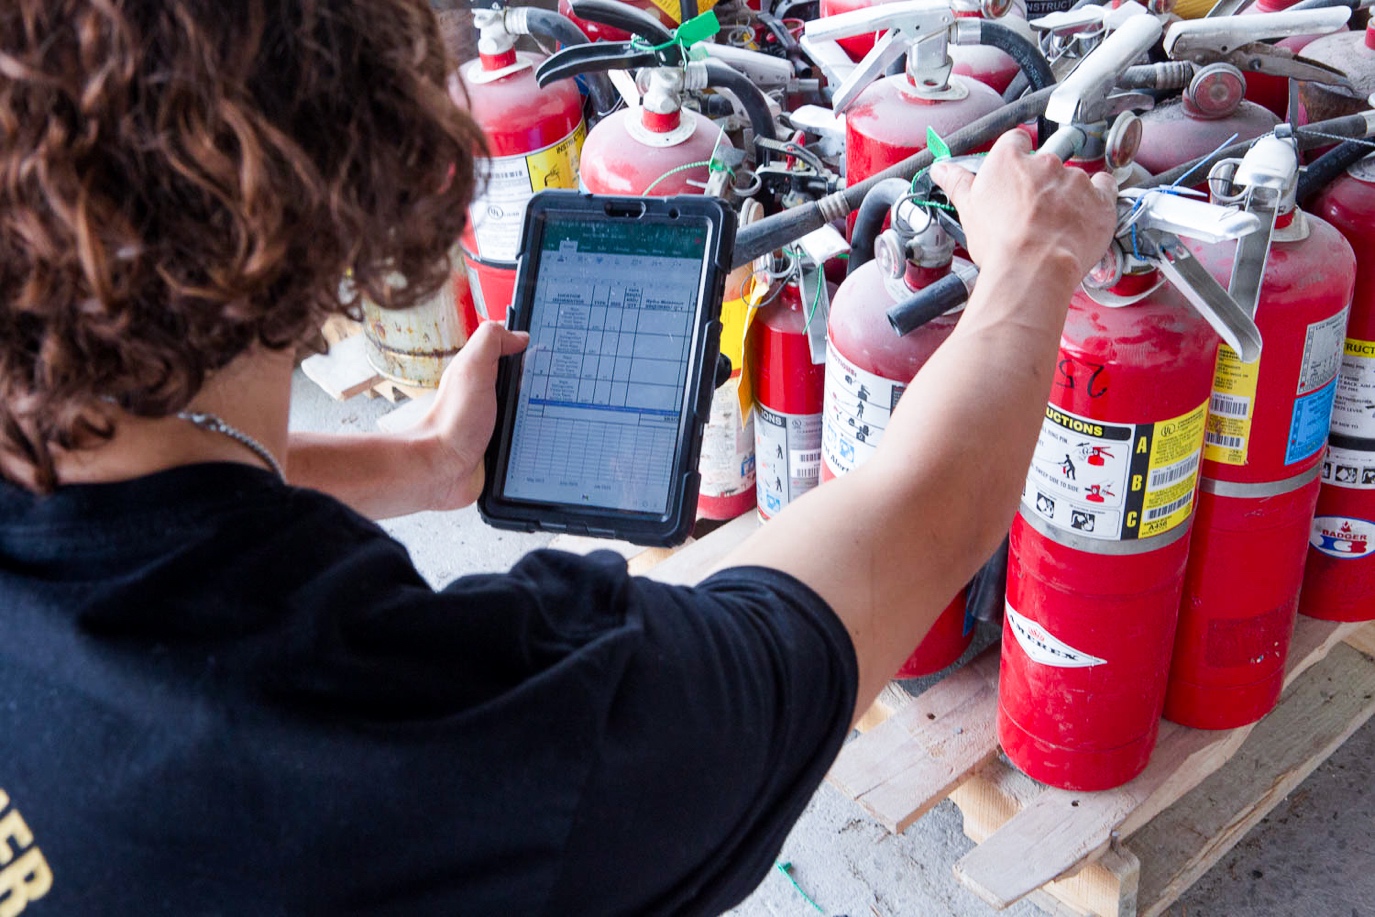 Orca’s Excel integration means facilities can easily review inspections from the West Fire Extinguisher Service 